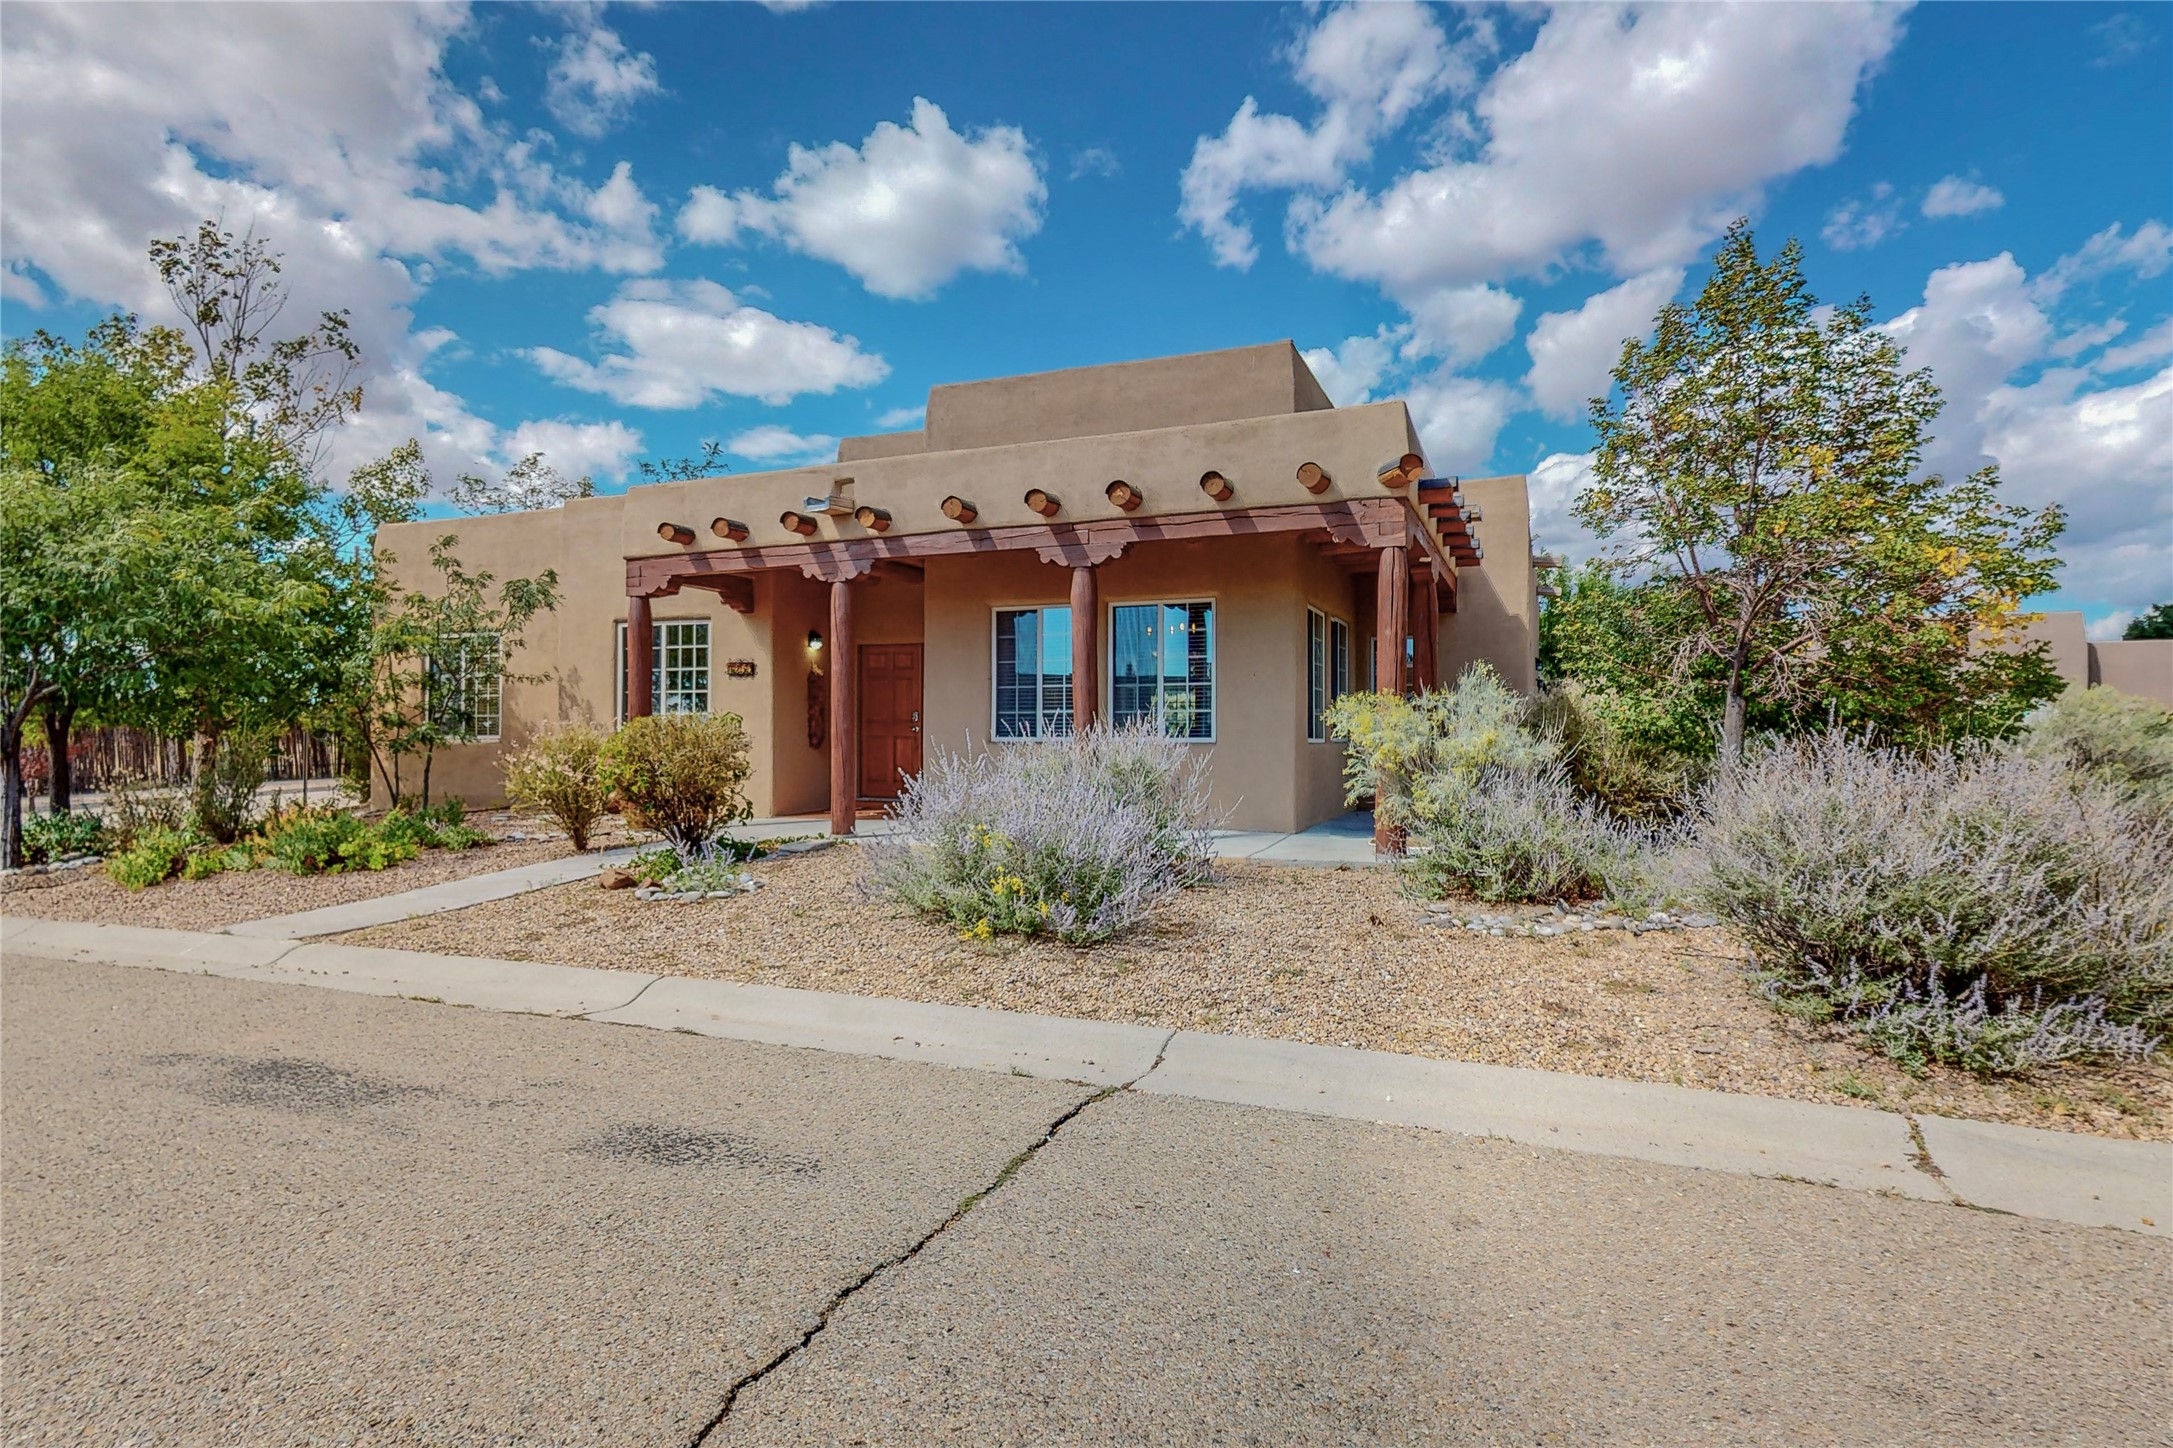 4259 Indian Summer Lane, Santa Fe, New Mexico 87507, 4 Bedrooms Bedrooms, ,3 BathroomsBathrooms,Residential,For Sale,4259 Indian Summer Lane,202233007